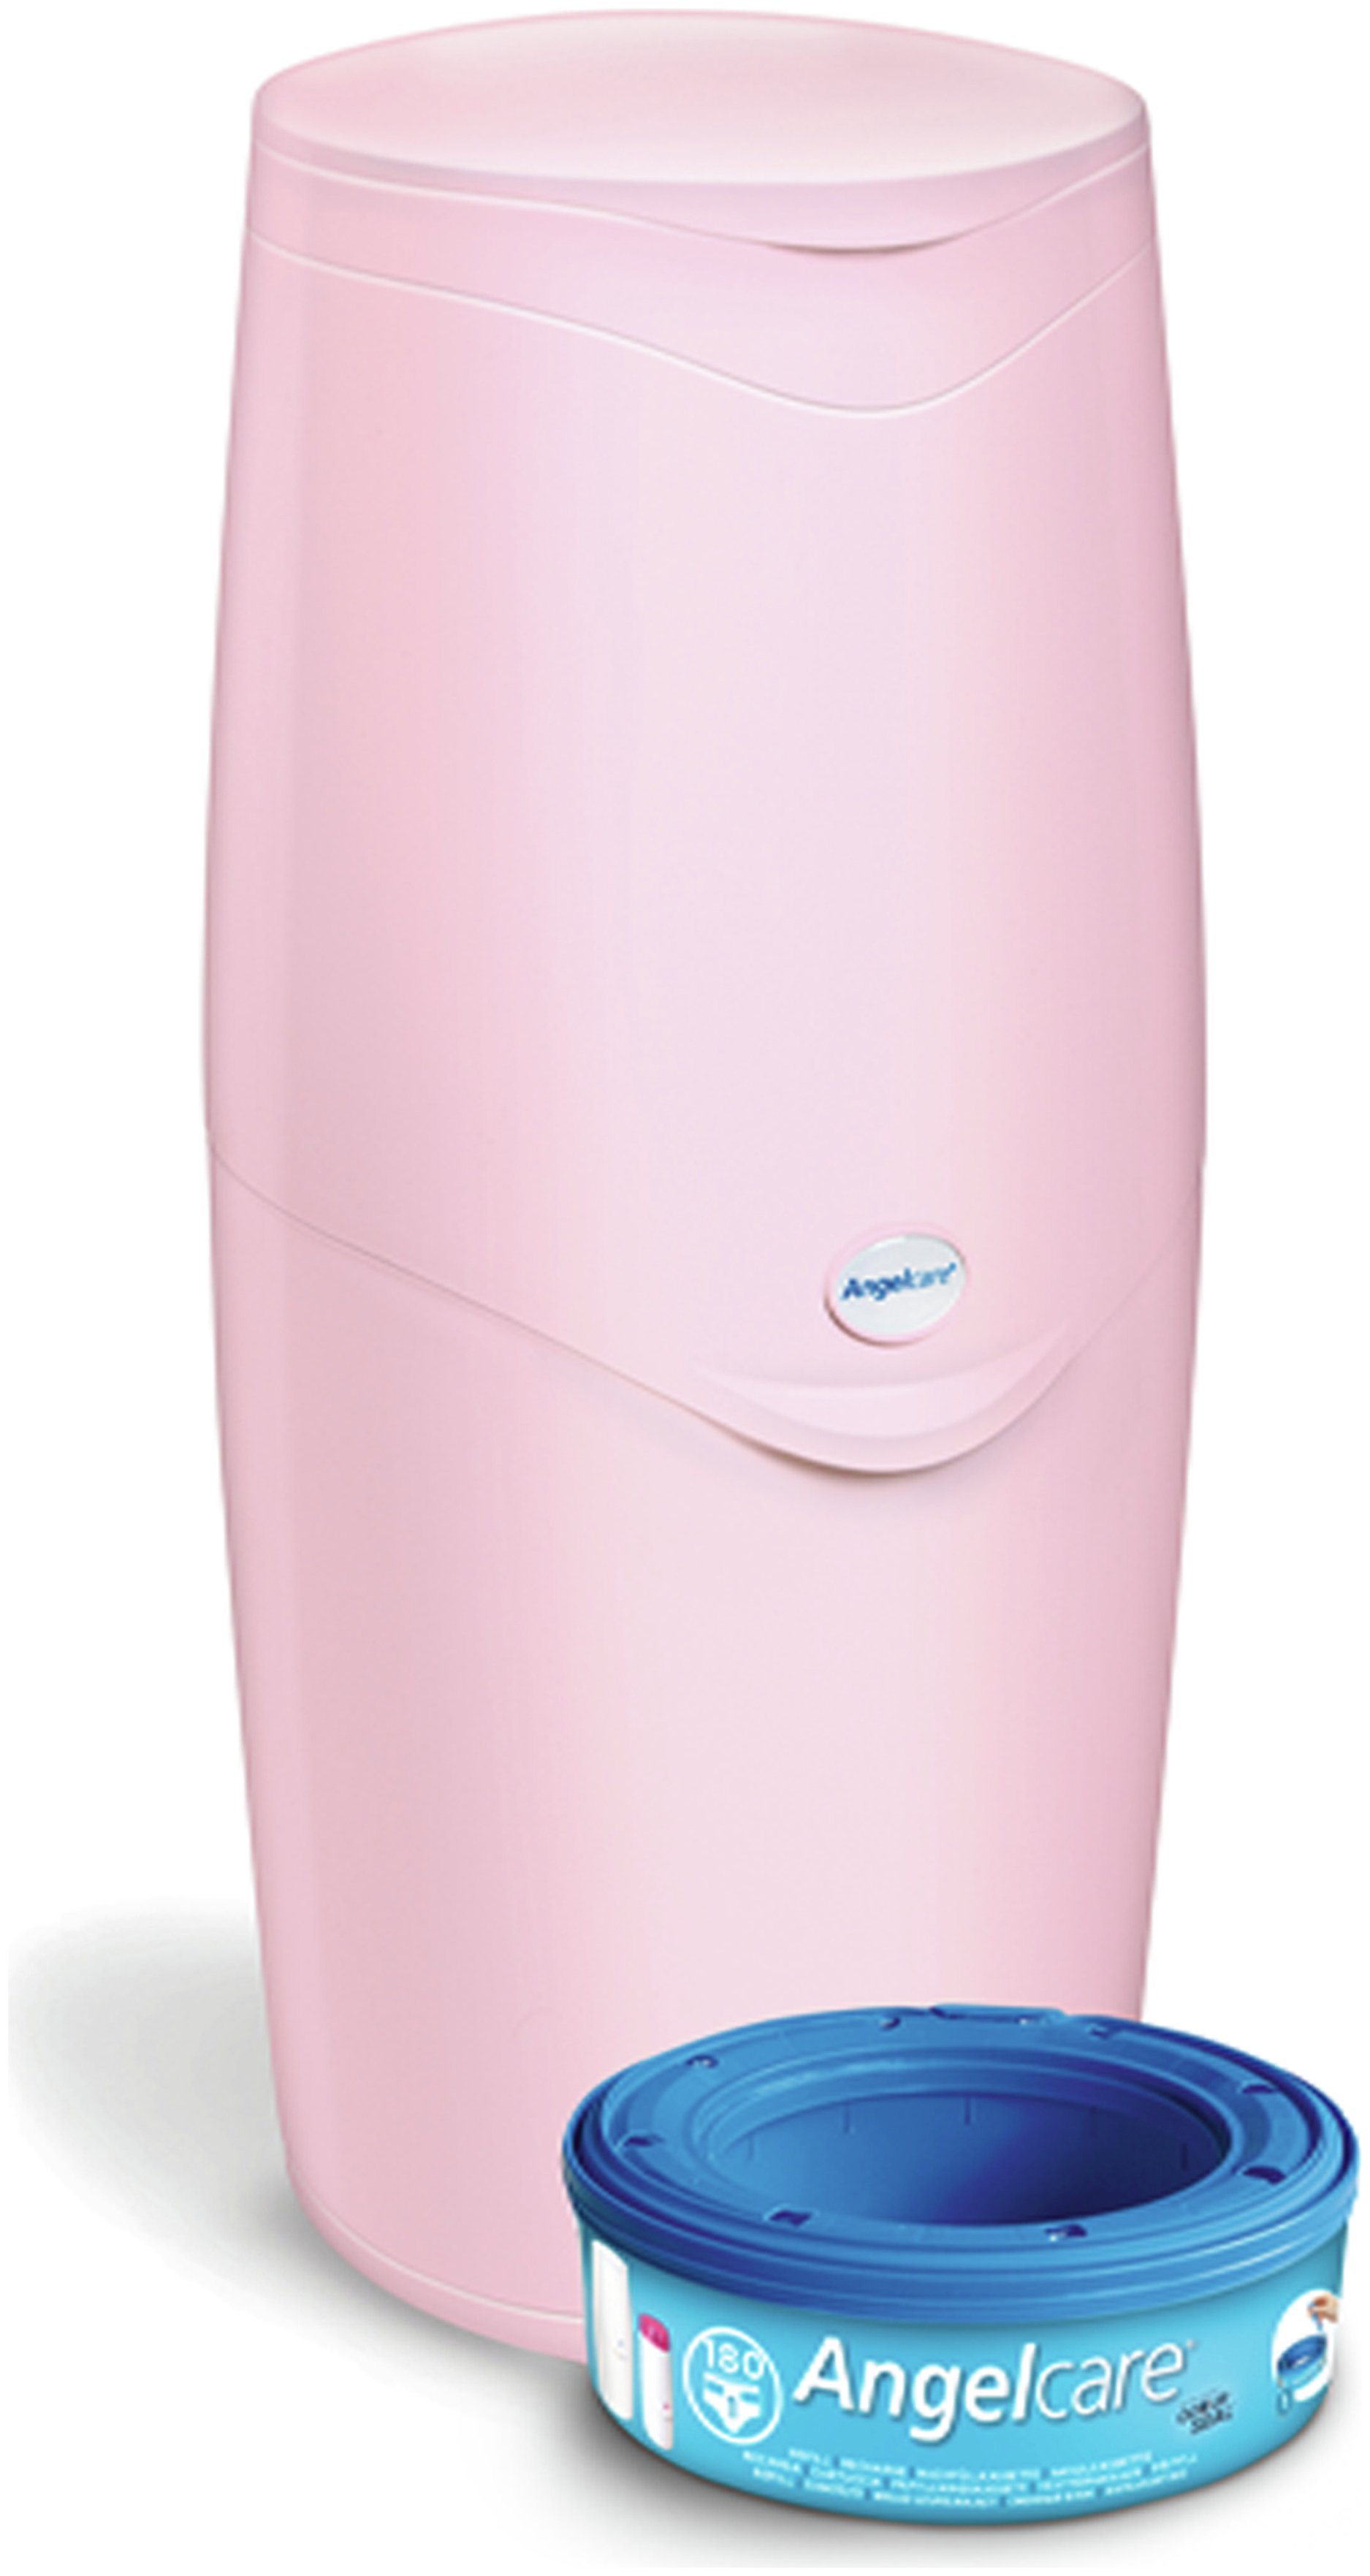 Angelcare Nappy Disposal System - Pink